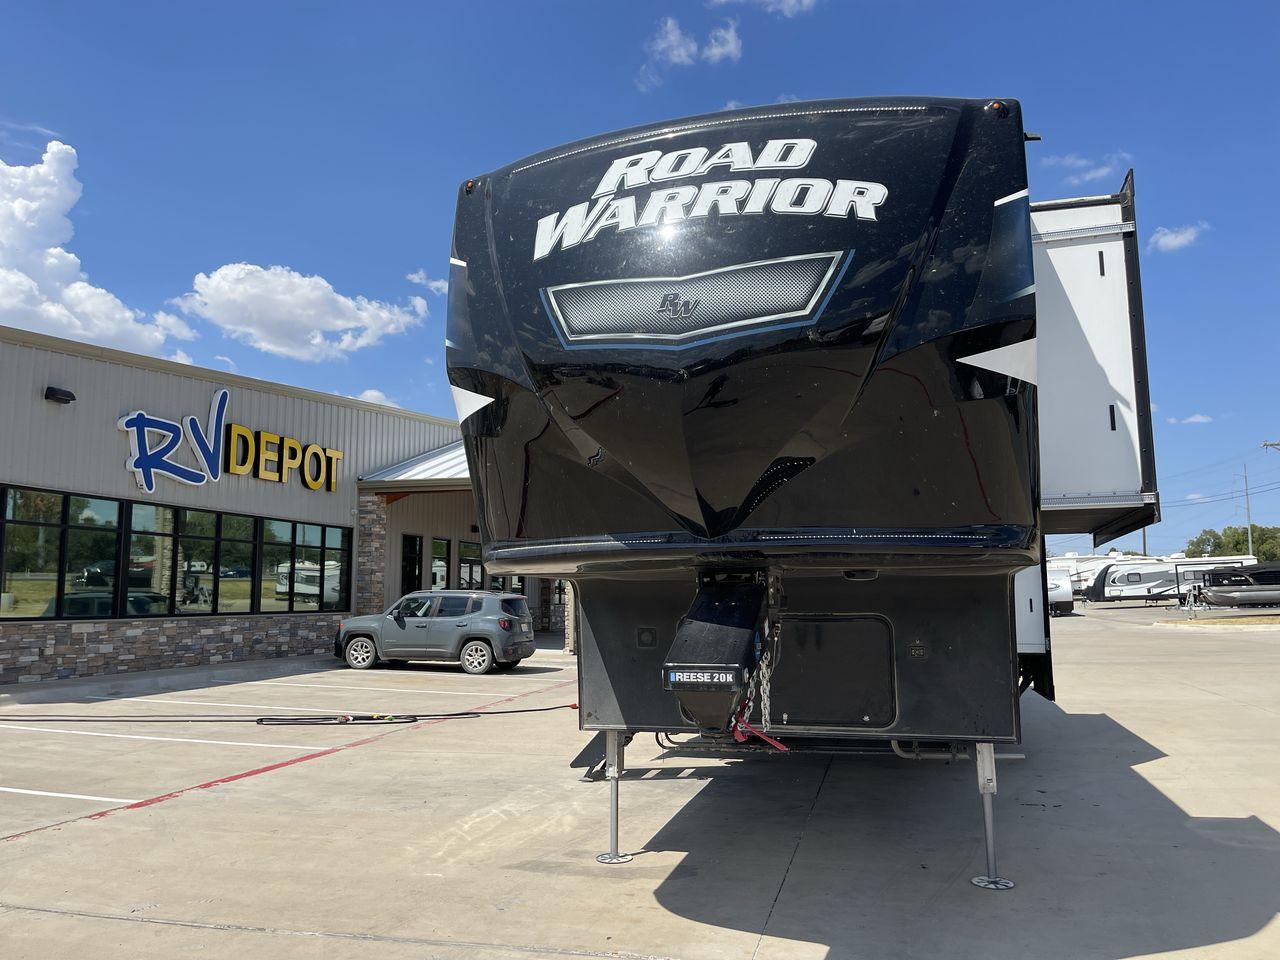 2021 HEARTLAND ROAD WARRIOR 351 (5SFCG4128ME) , Length: 41.5 ft. | Dry Weight: 14,530 lbs. | Gross Weight: 17,250 lbs. | Slides: 3 transmission, located at 4319 N Main St, Cleburne, TX, 76033, (817) 678-5133, 32.385960, -97.391212 - Are you an adventure seeker looking for the perfect toy hauler to take on your next road trip? Look no further than the 2021 Heartland Road Warrior 351, available for sale at RV Depot in Cleburne, TX. With its impressive features and capabilities, this toy hauler is ready to take you on unforgettabl - Photo #0